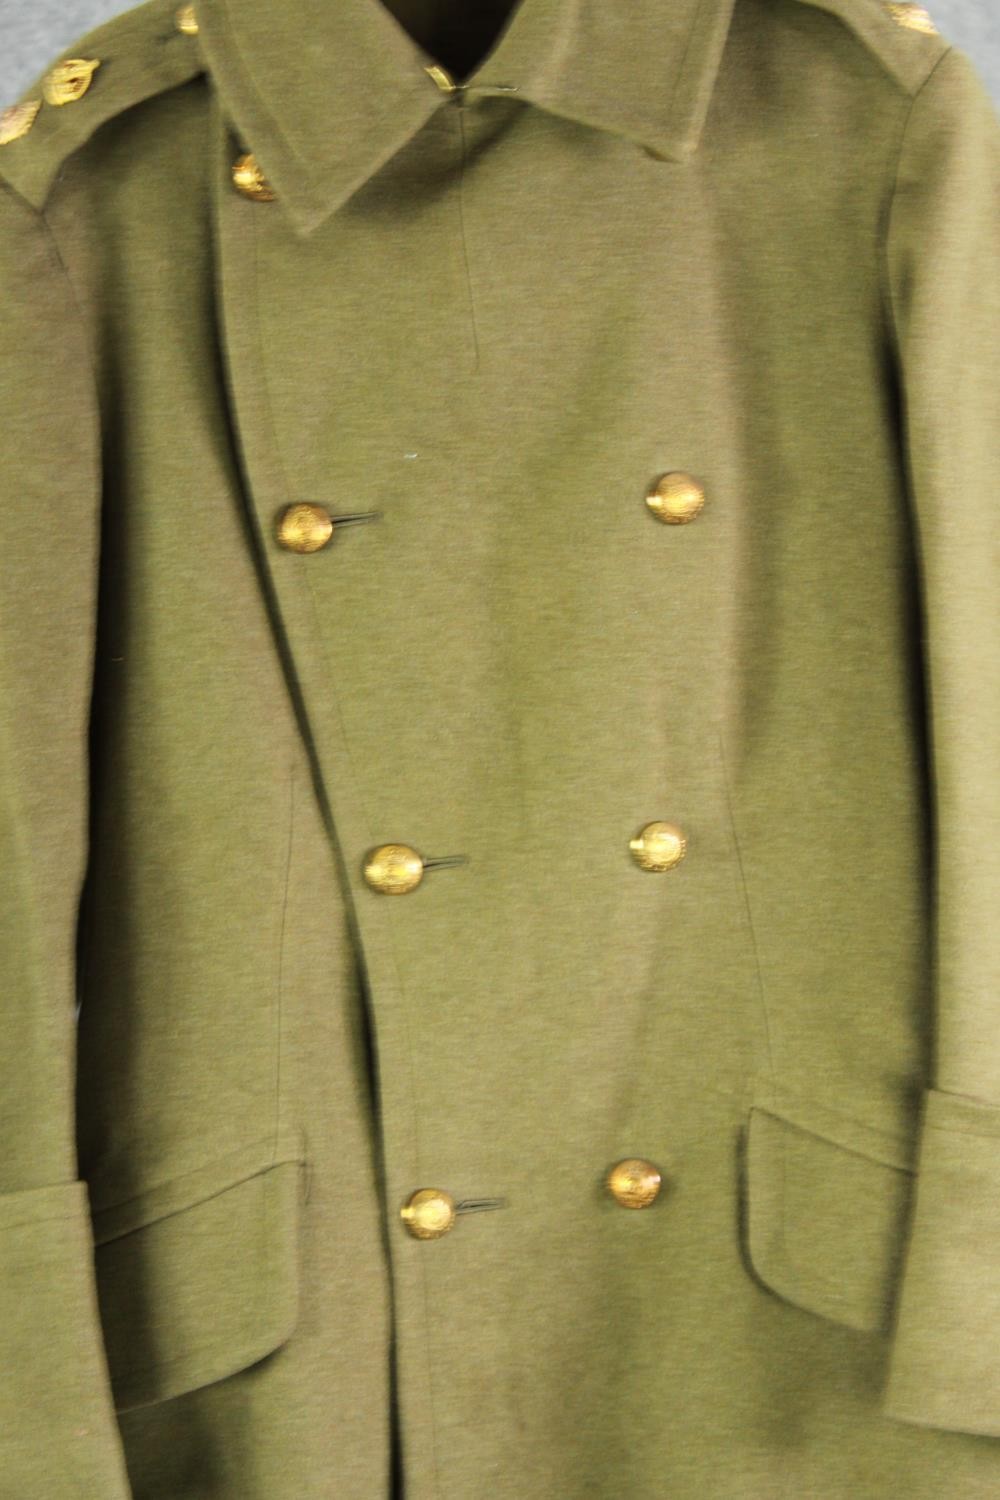 A British Army officer's Great Coat. - Image 3 of 8